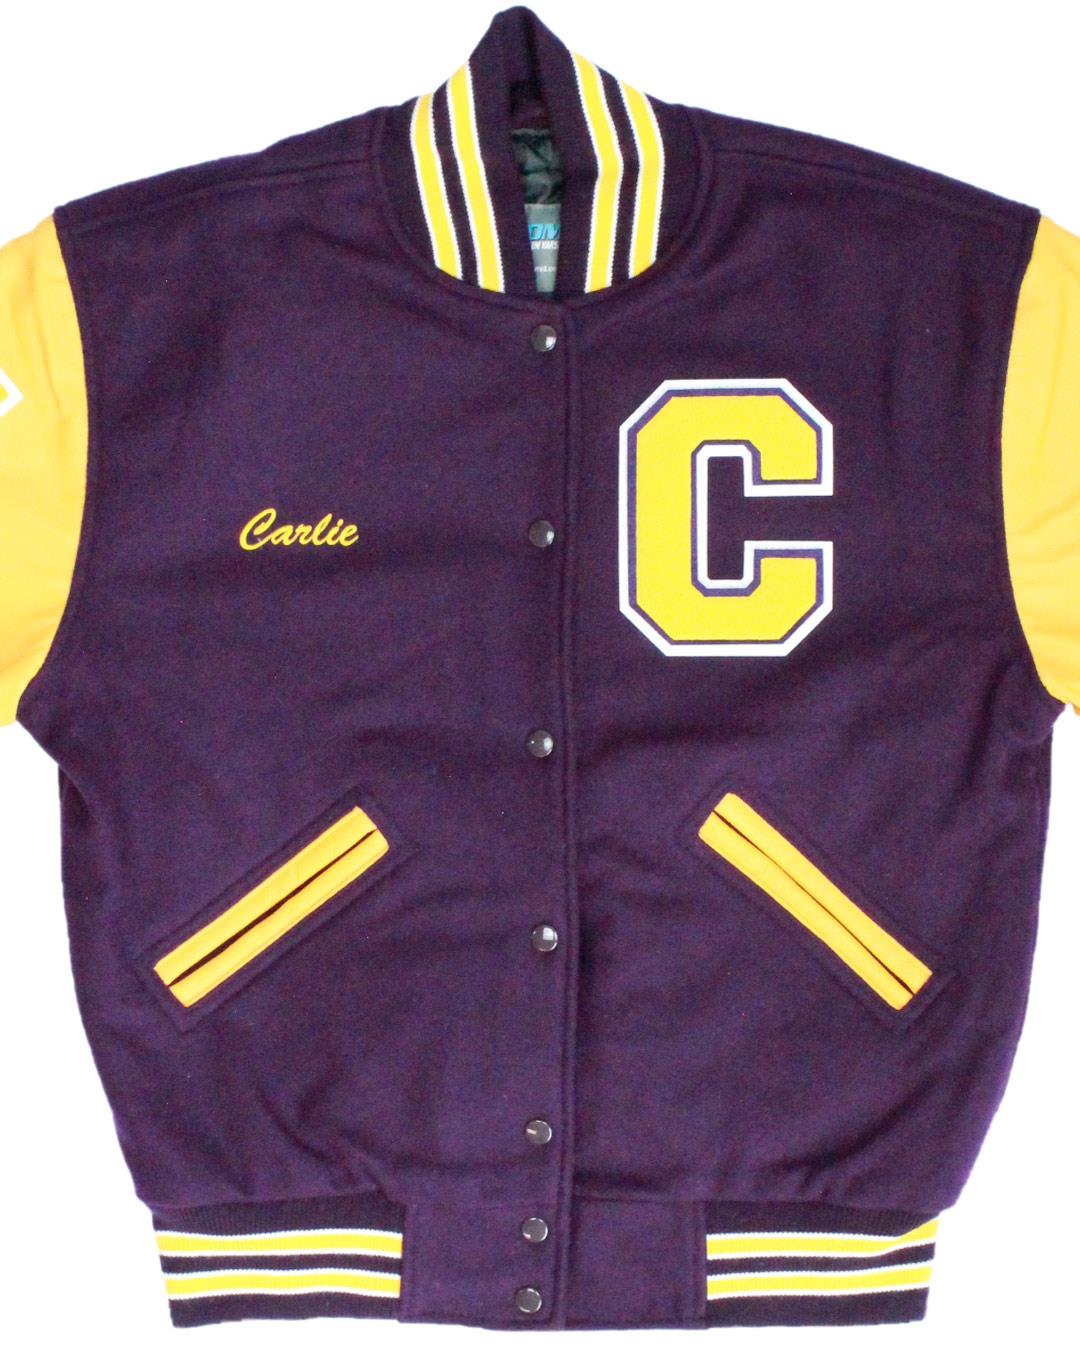 Carlyle High School Indians Letterman Jacket, Carlyle, IL - Front